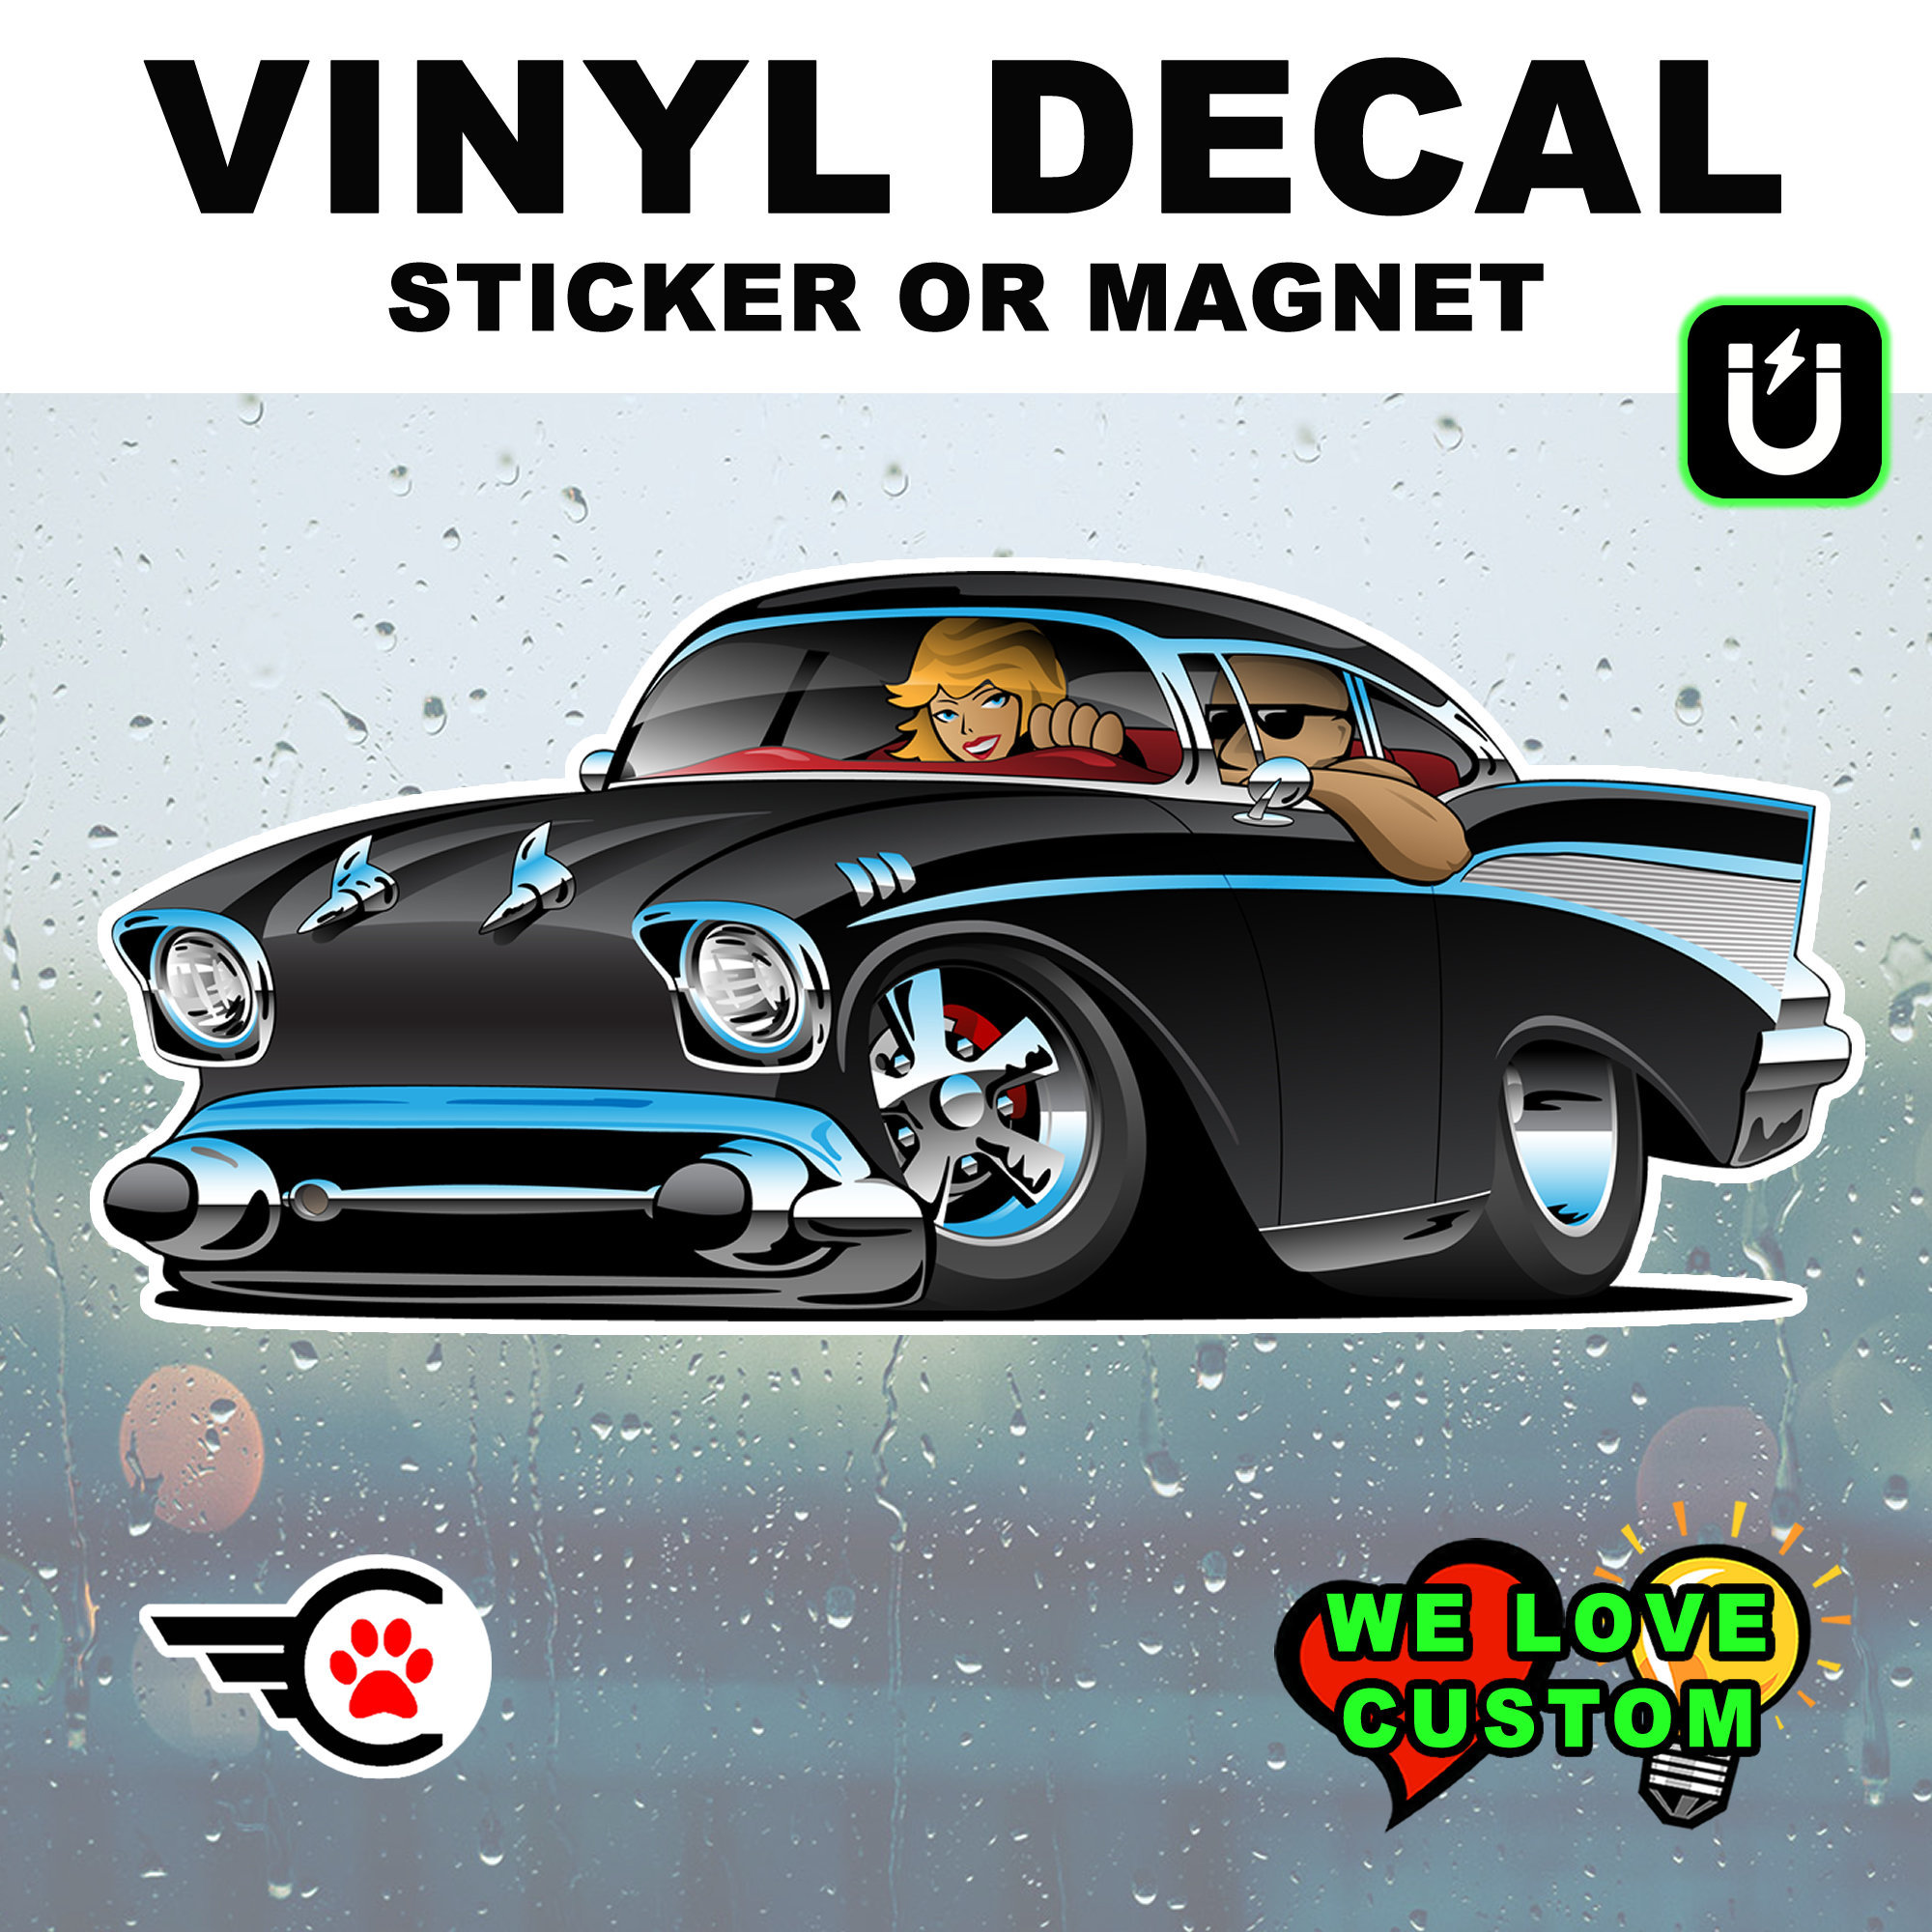 Hot Rod Vinyl Sticker or Magnet in Various Sizes up to 9